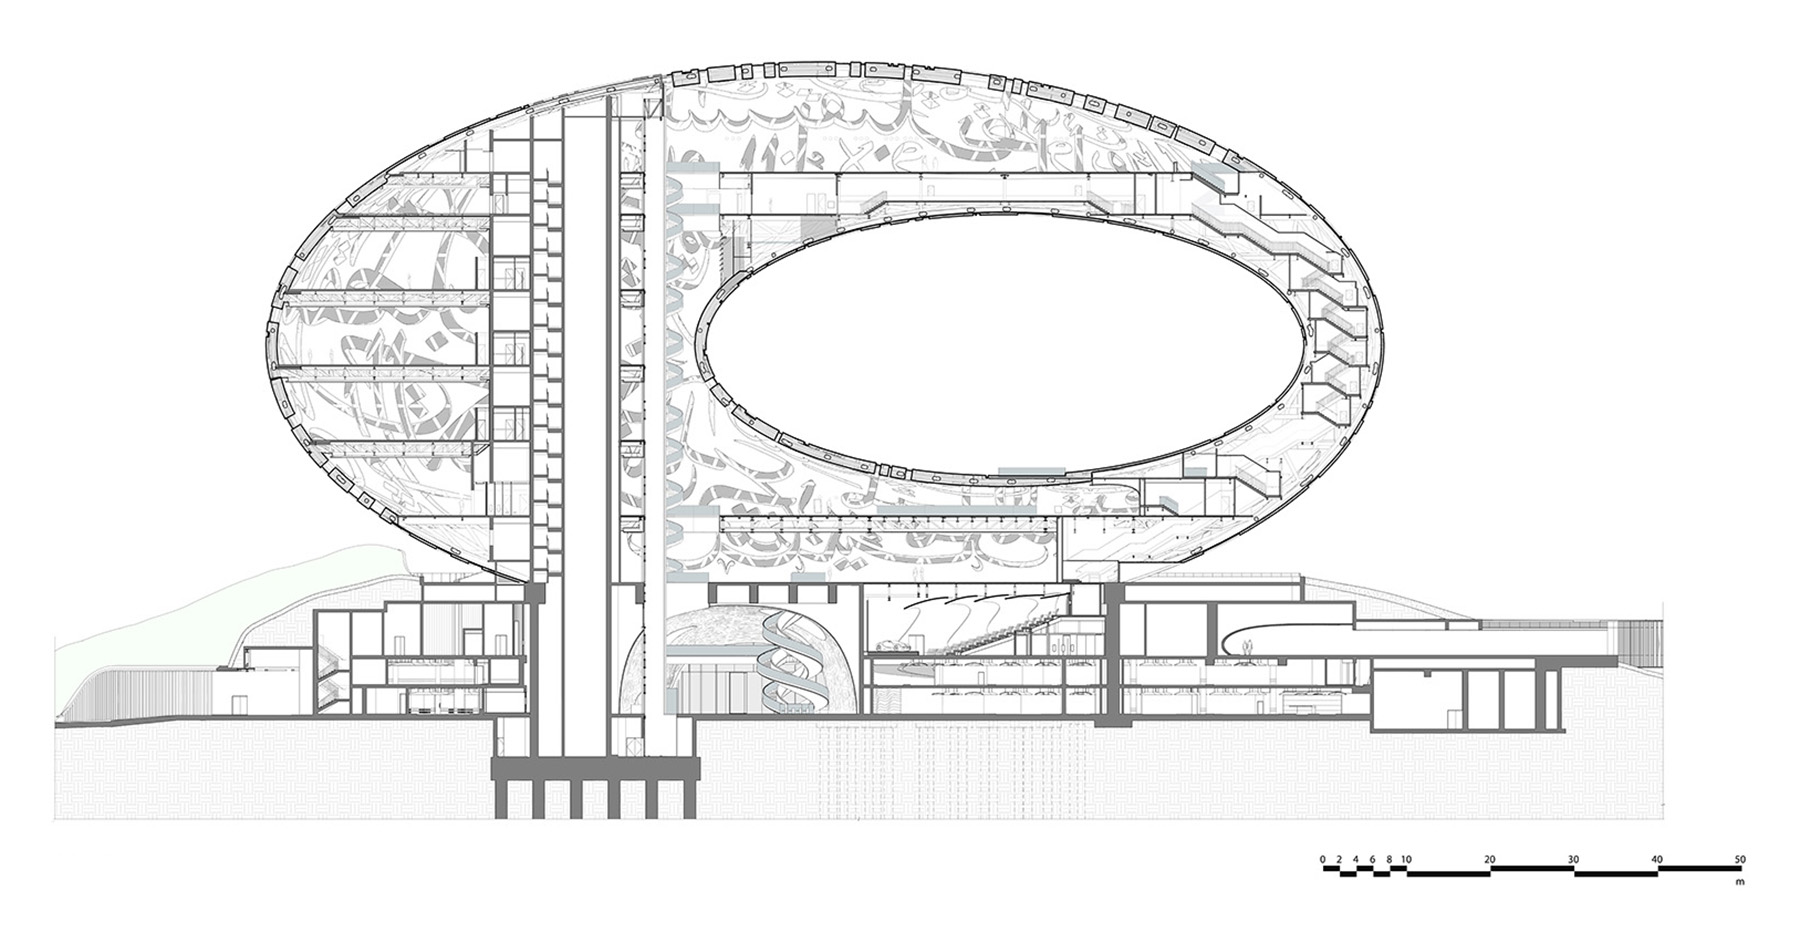 Drawing shows a longitudinal section of a circular structure. 